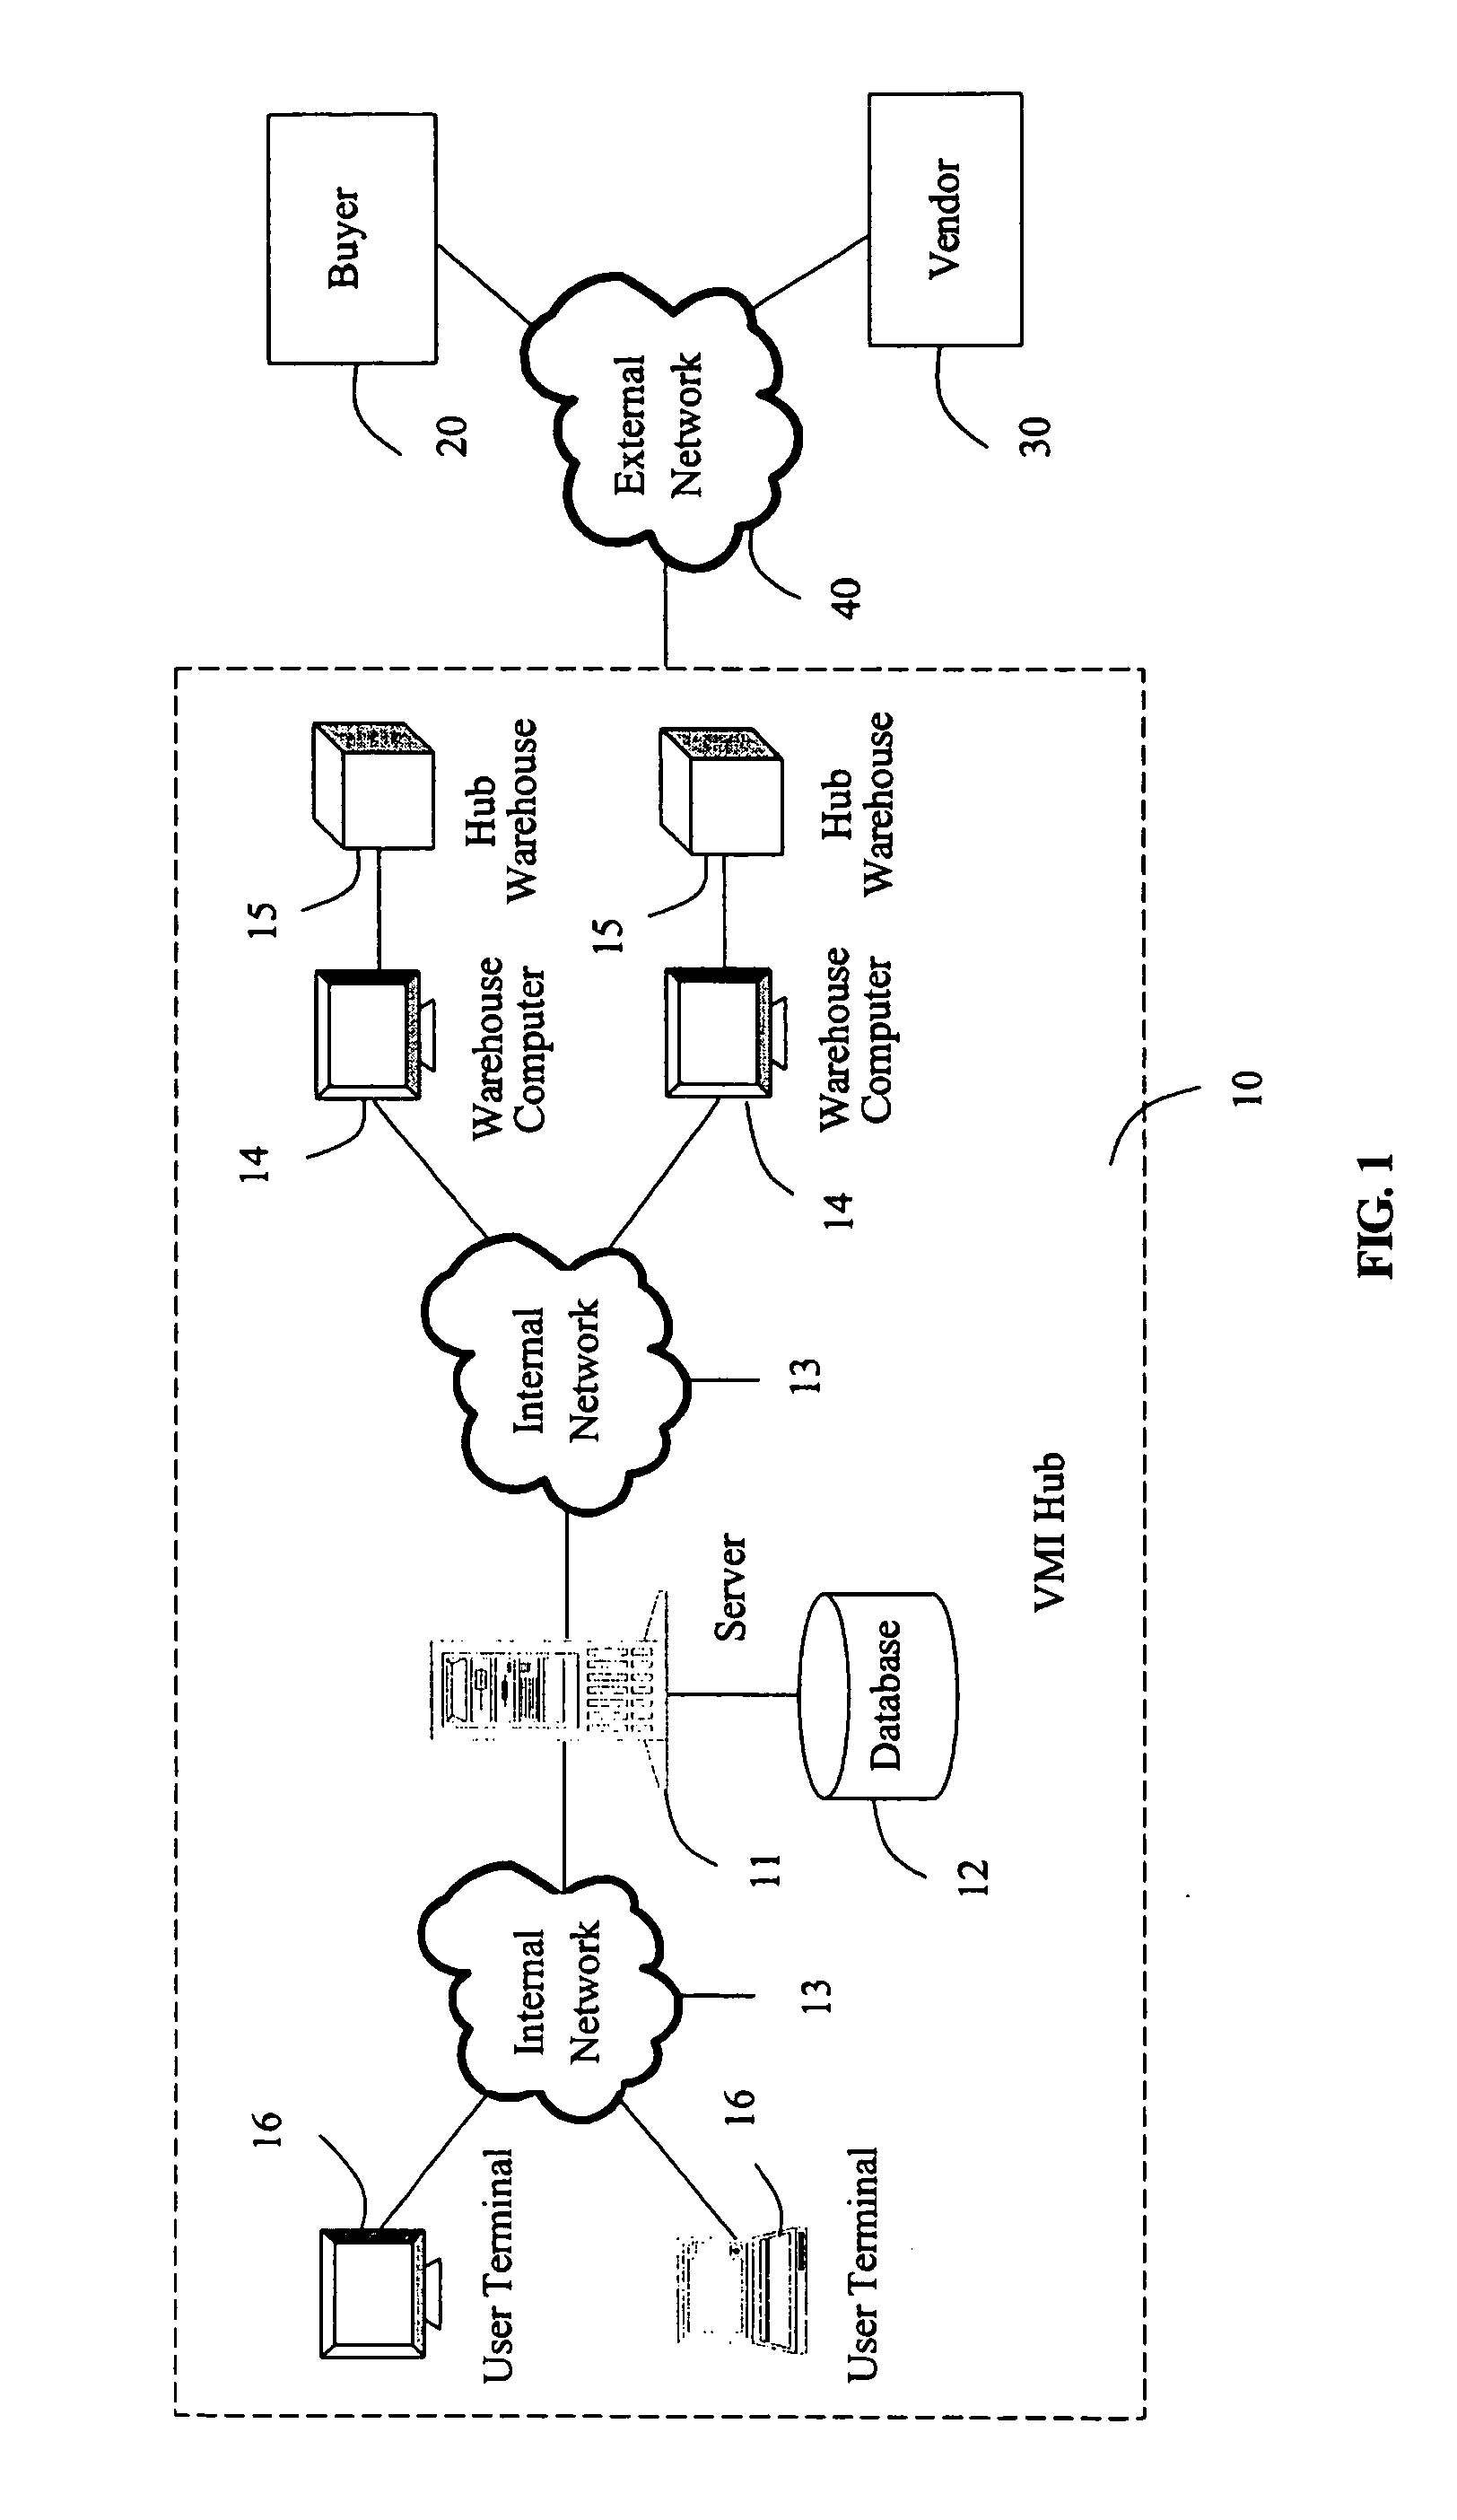 System and method for managing shipment in a supply chain